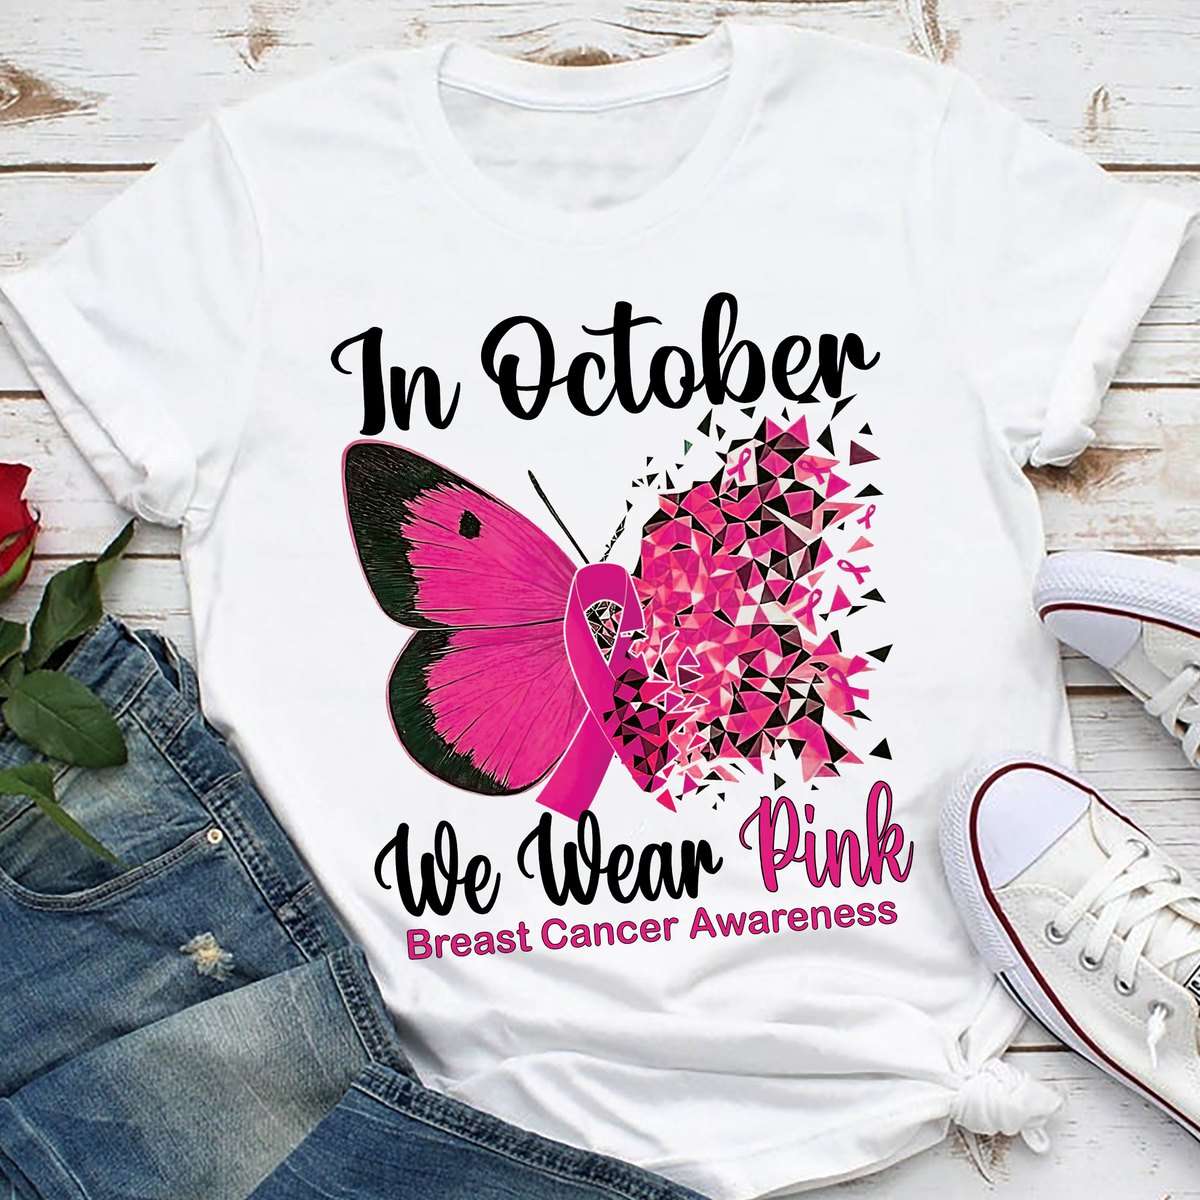 In October we wear pink - Breast cancer awareness, butterfly ribbon, cancer warrior